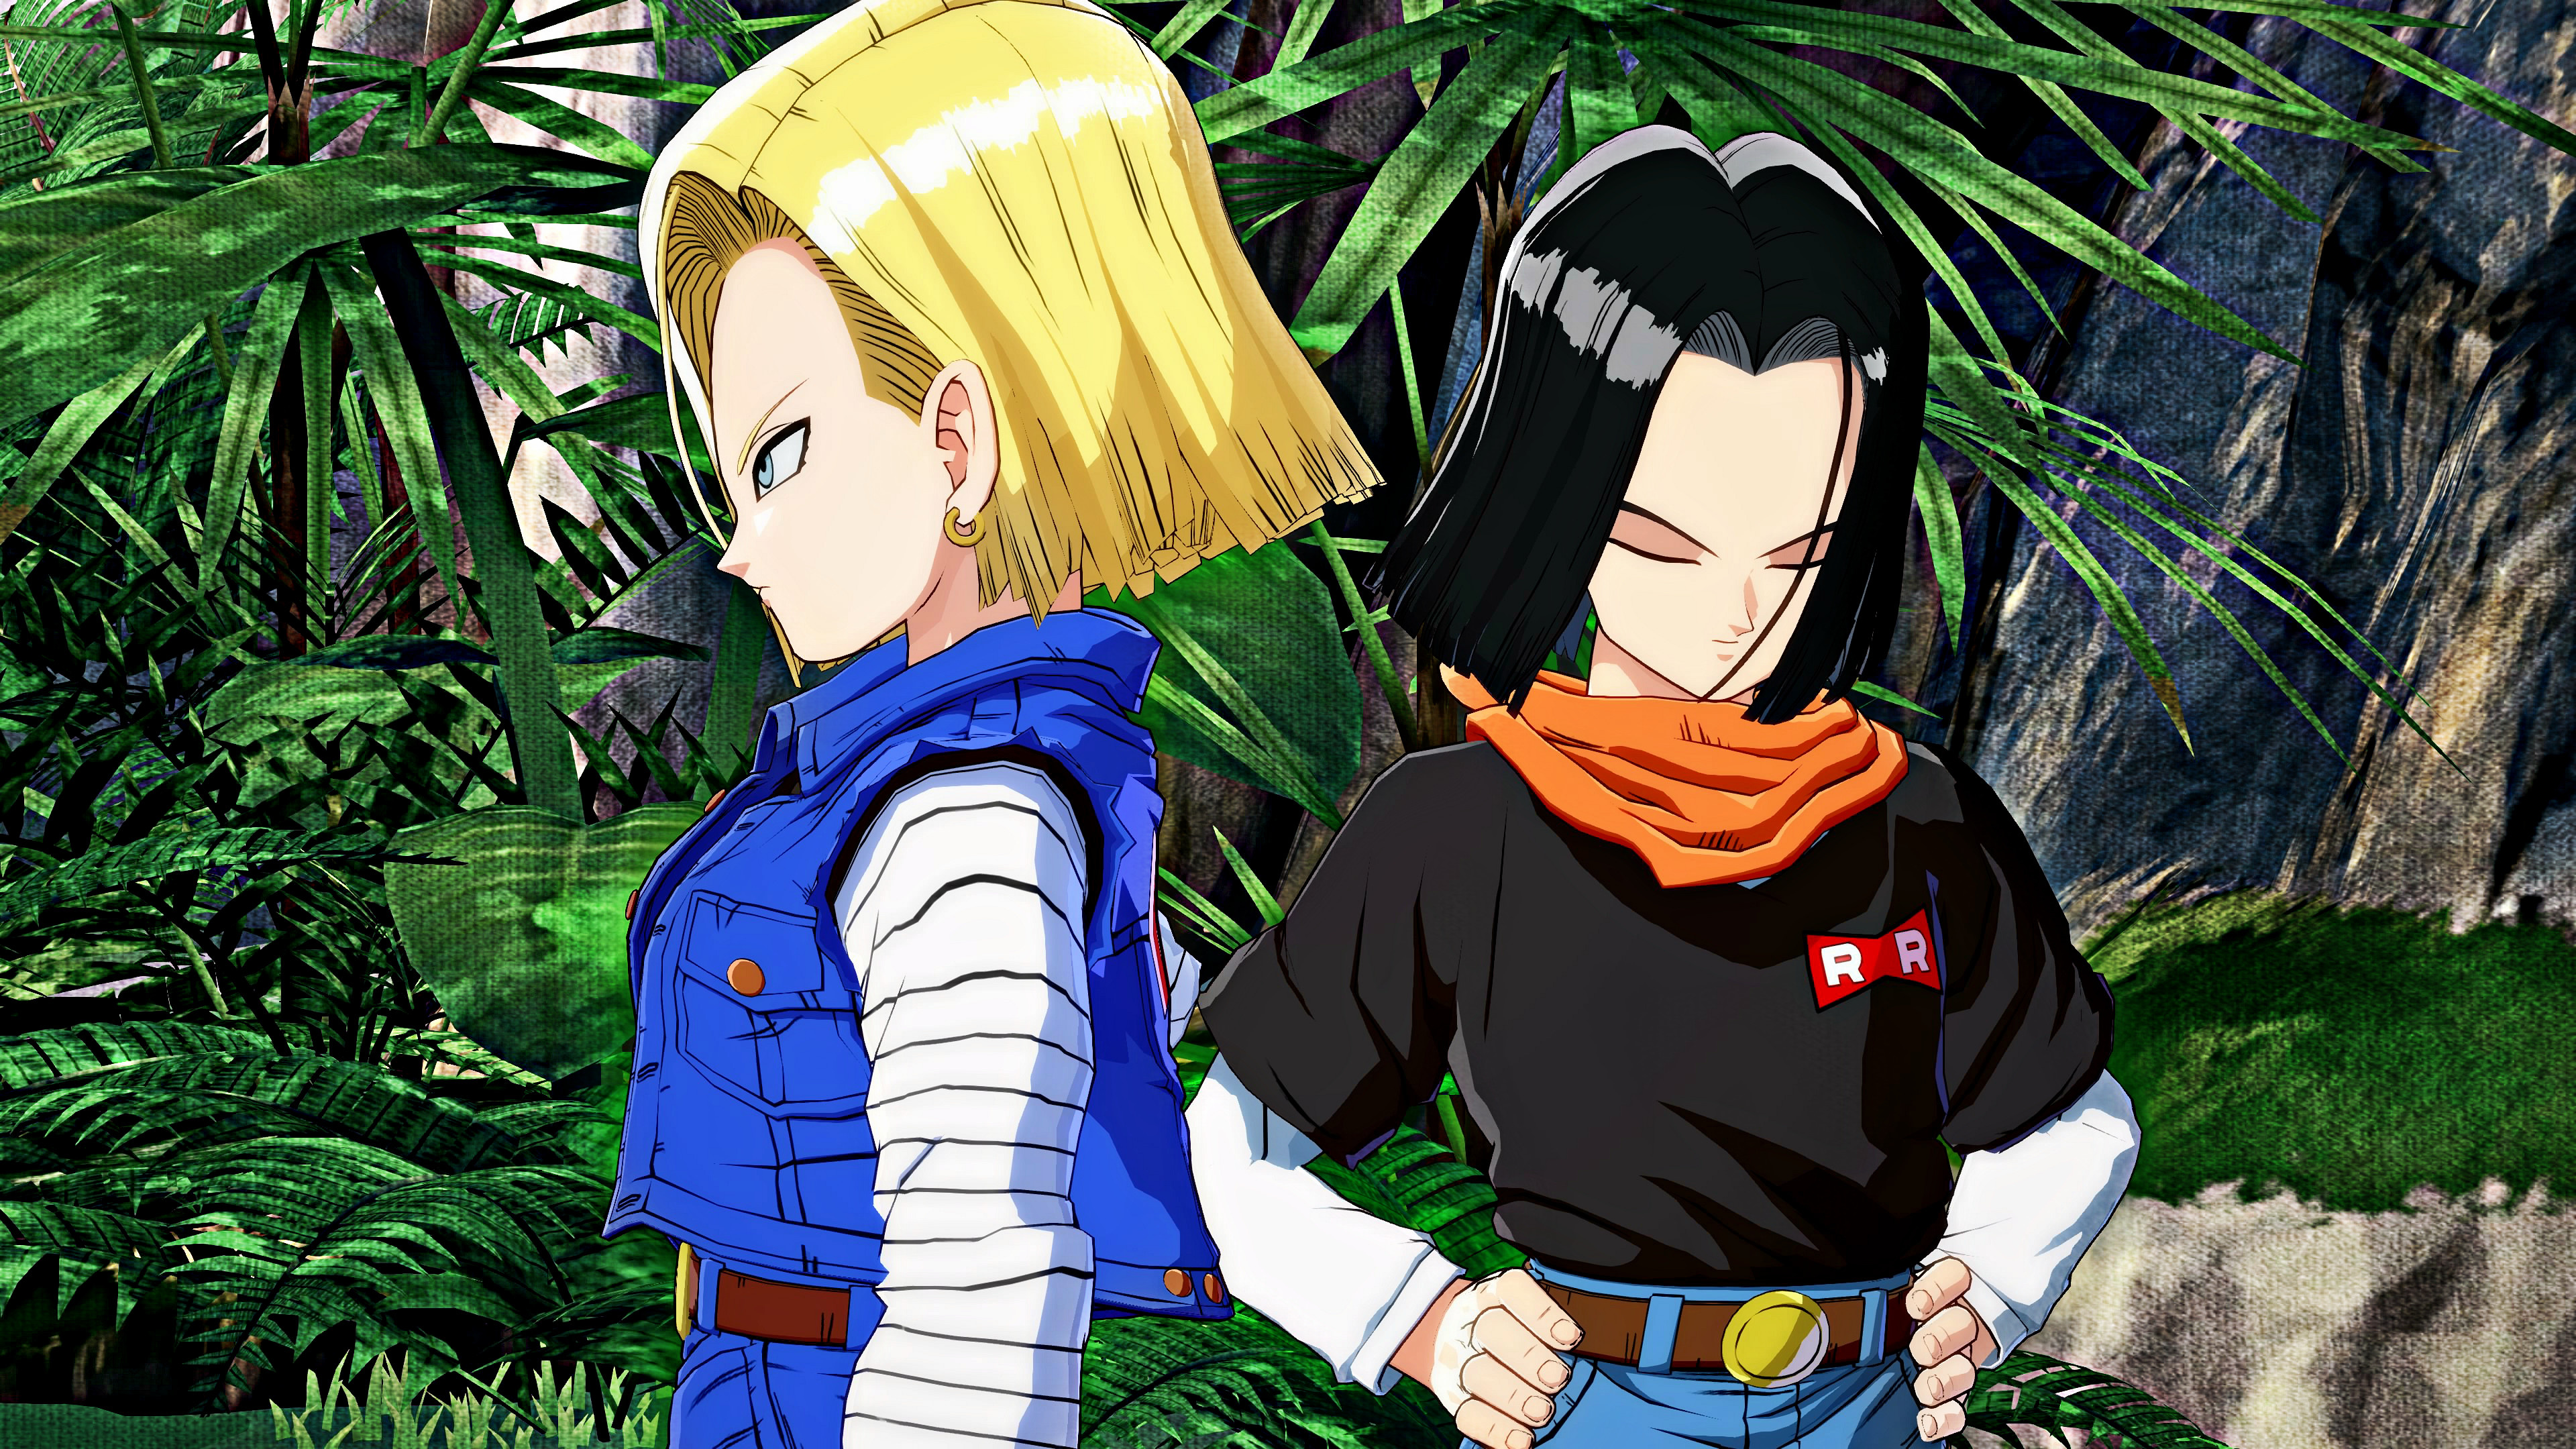 Android 18, Wallpapers, Collection, Pictures, 3840x2160 4K Desktop